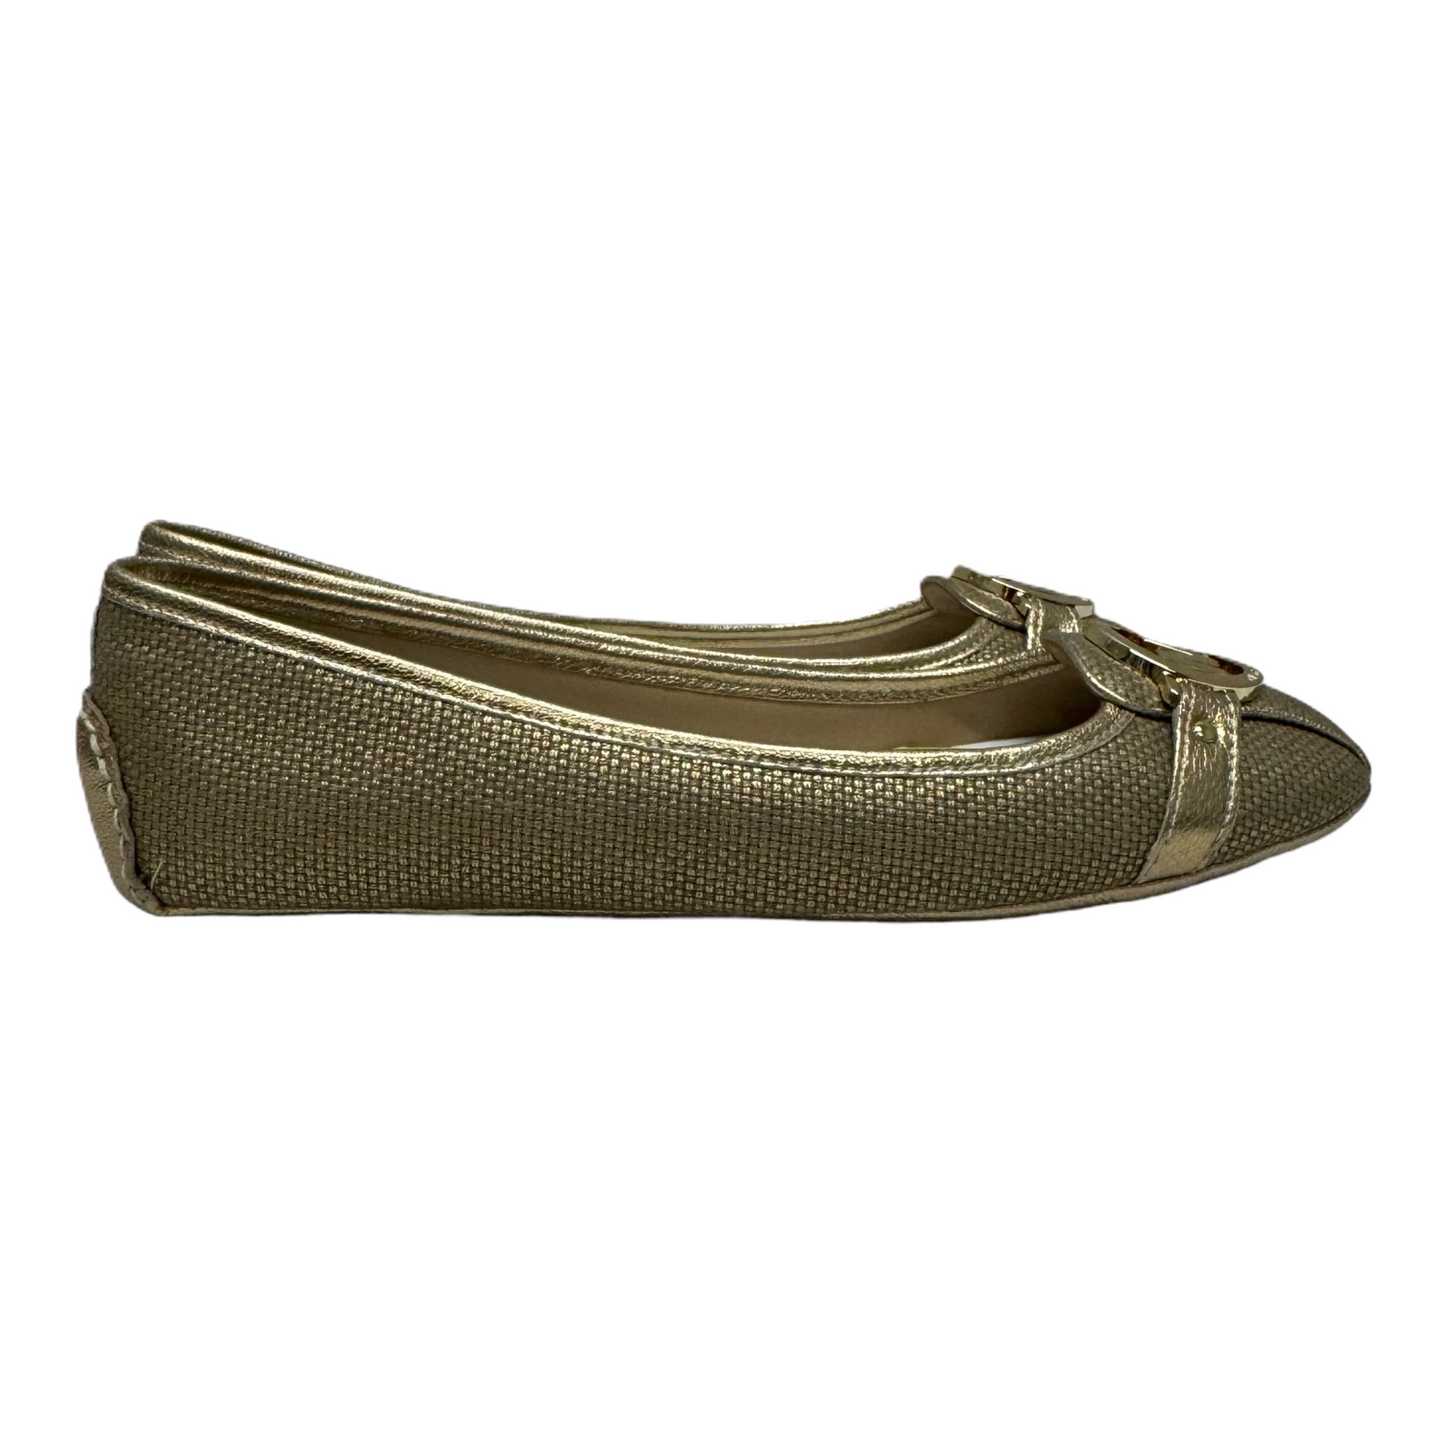 Gold Shoes Flats By Michael By Michael Kors, Size: 8.5